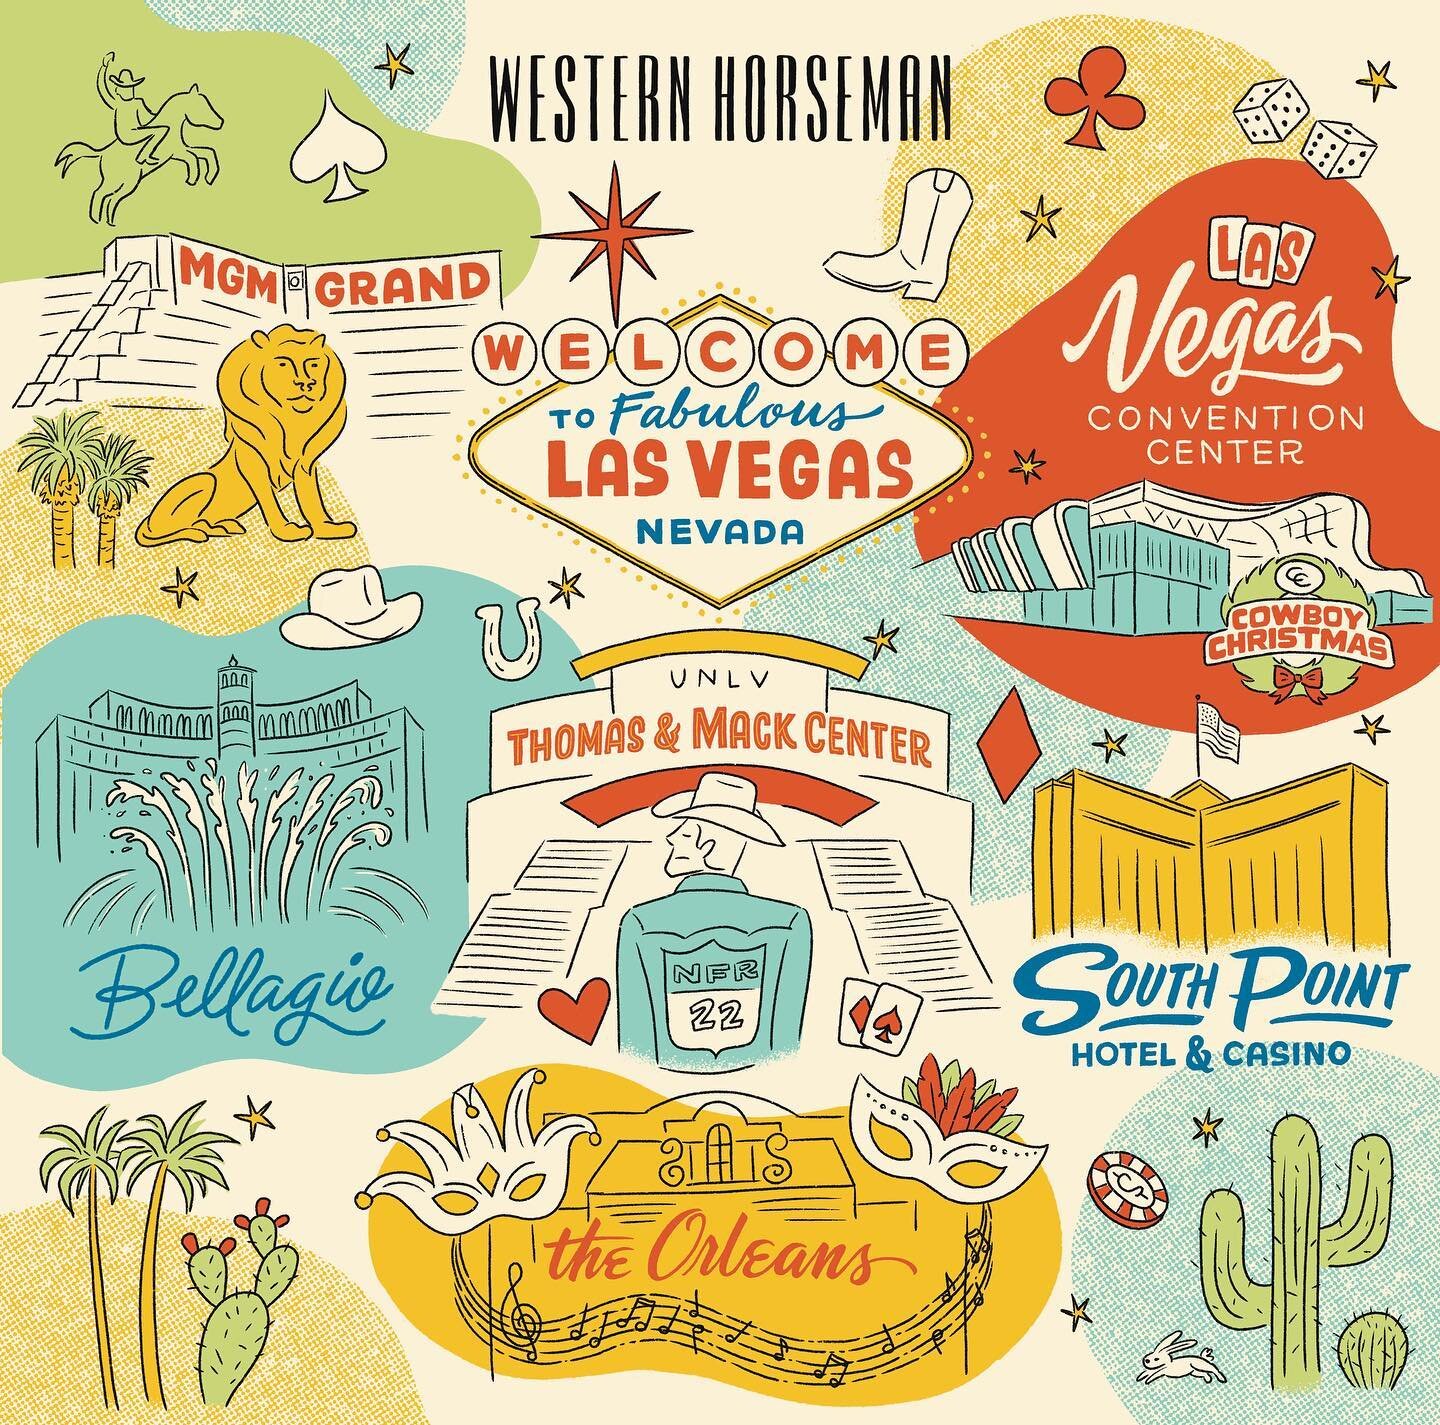 Super fun project from last year for @westernhorseman highlighting the stops for their scavenger hunt during the national finals rodeo in Las Vegas. Thanks so much to the editor @amanda_____plz!

#editorialillustration #illustrationsndlettering #hand